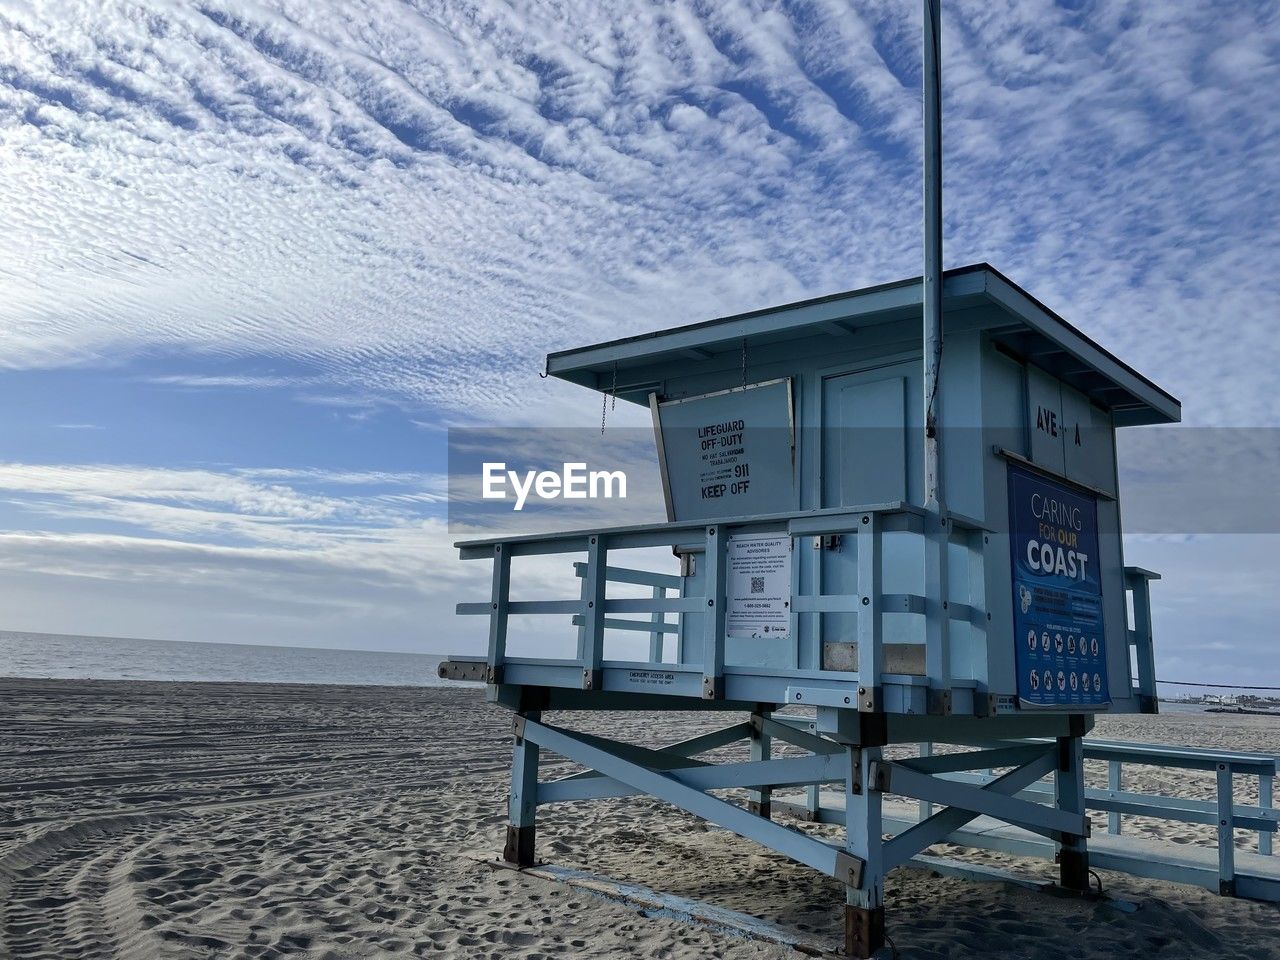 beach, land, sky, sea, architecture, lifeguard hut, hut, built structure, water, cloud, nature, man made structure, sand, security, scenics - nature, protection, beauty in nature, winter, building exterior, no people, tranquility, snow, lifeguard, tower, tranquil scene, blue, ocean, day, building, horizon, outdoors, observation point, horizon over water, non-urban scene, coast, wood, travel destinations, landscape, idyllic, cold temperature